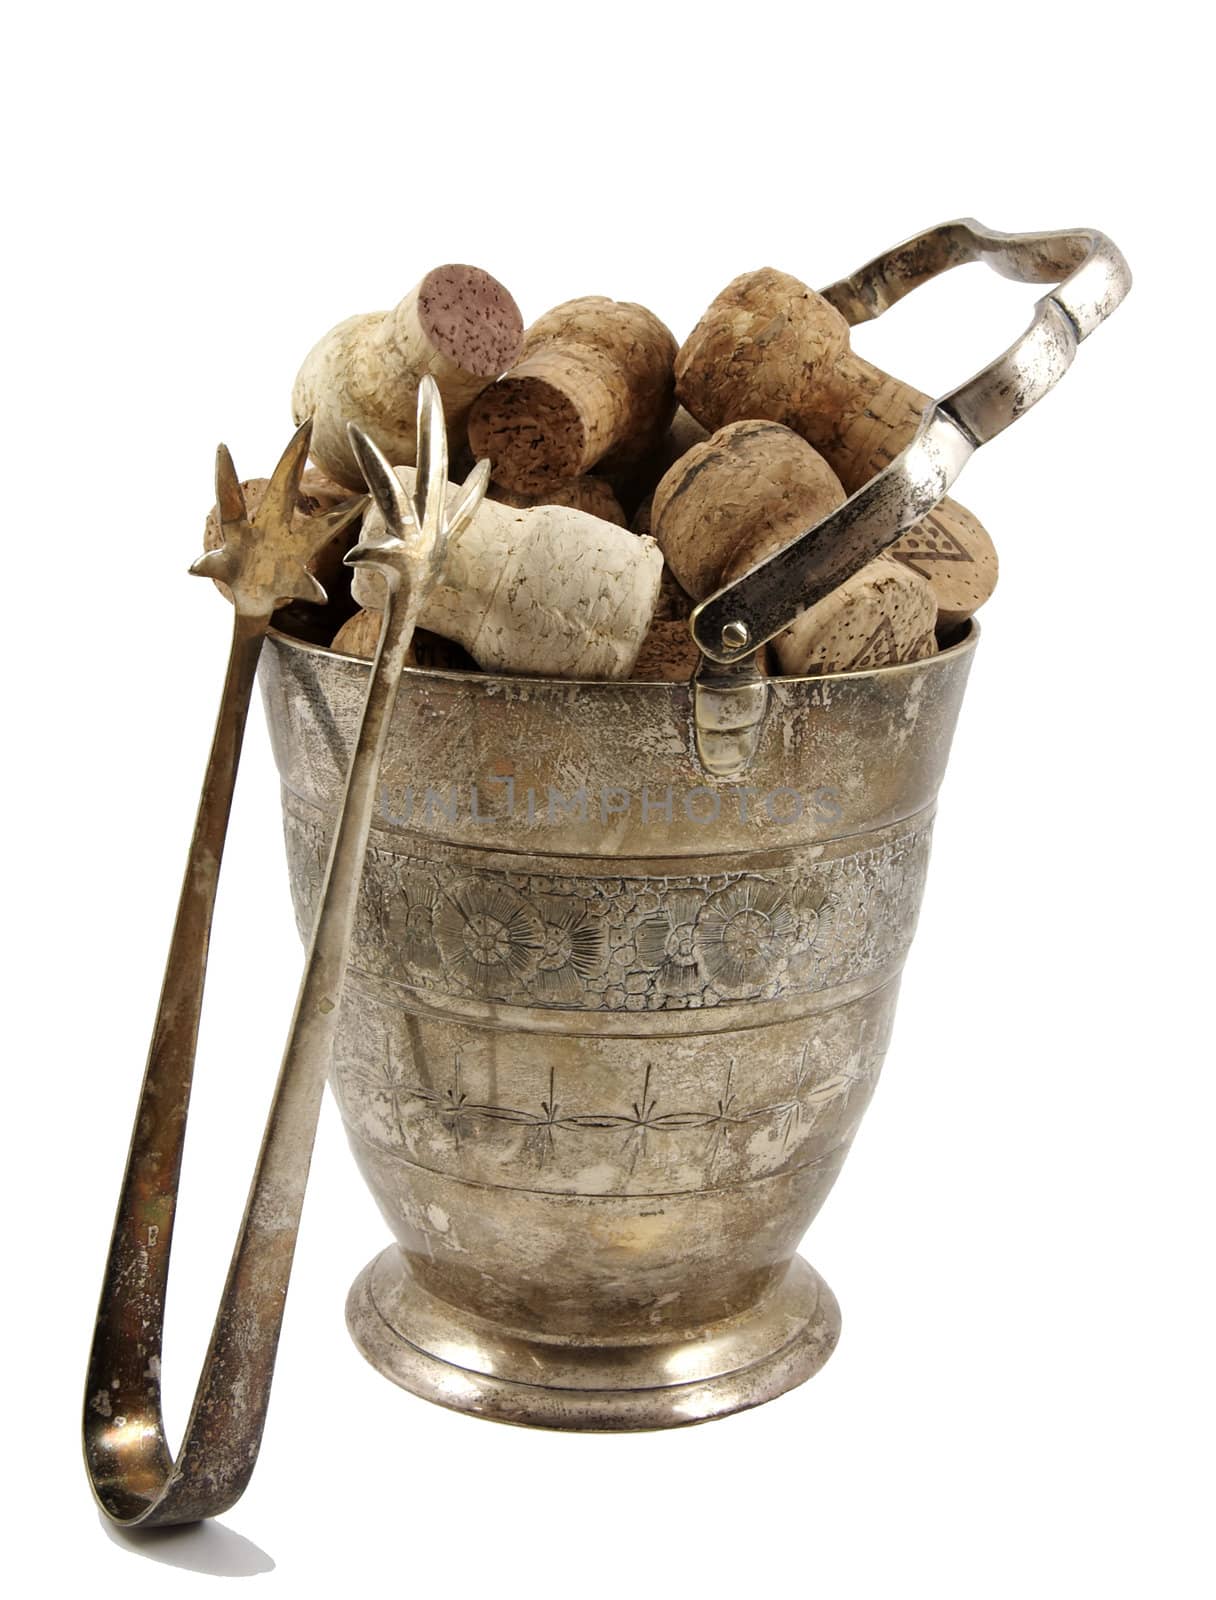 Ice tongs and bucket filled with corks isolated over white background